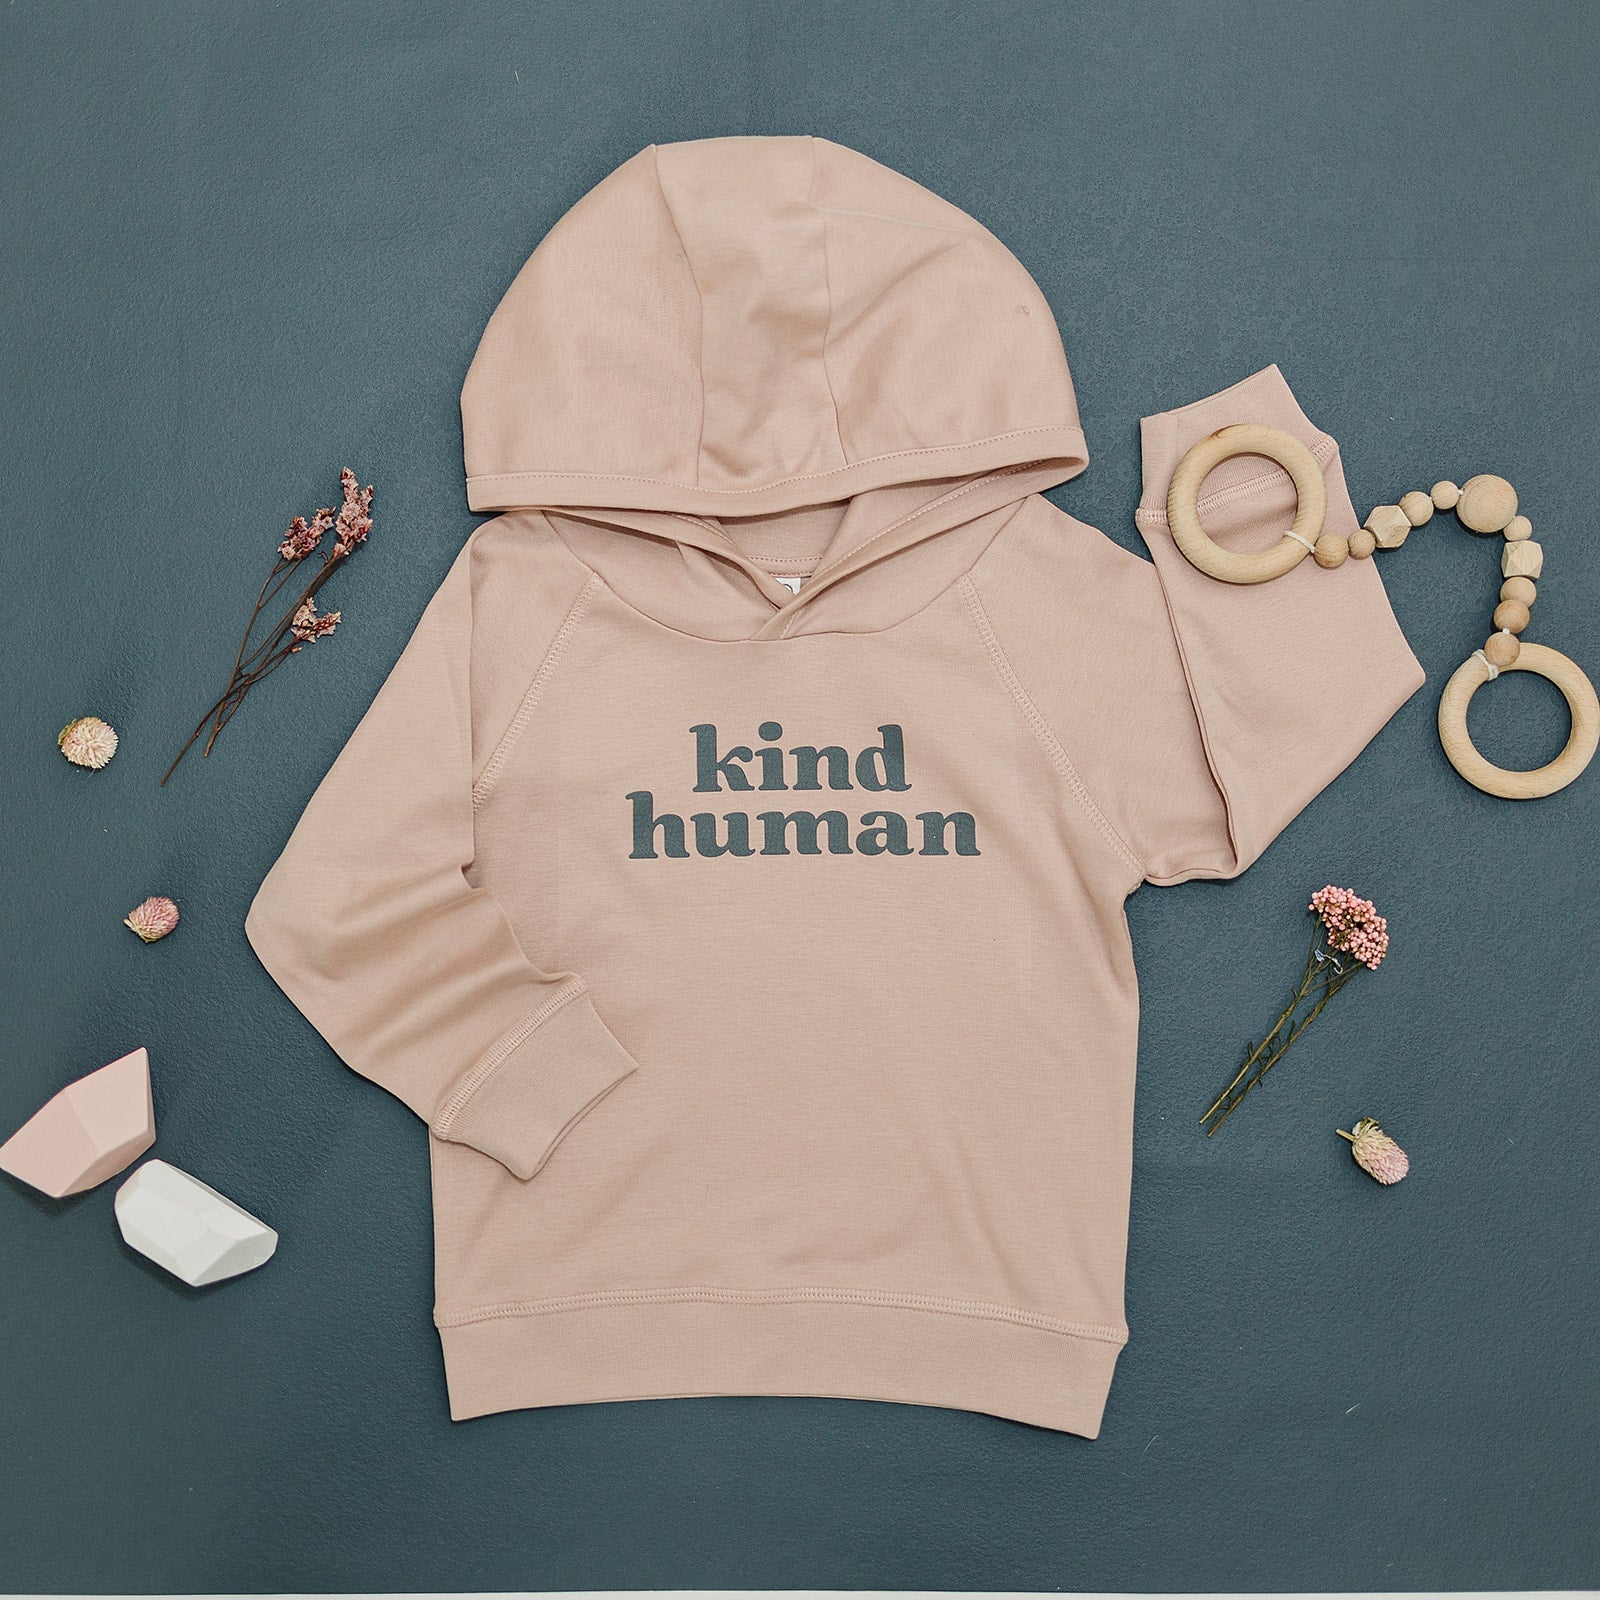 Soft beige 'kind human' hoodie laid flat on a dark teal surface, surrounded by whimsical dried flowers and natural wooden baby toys.